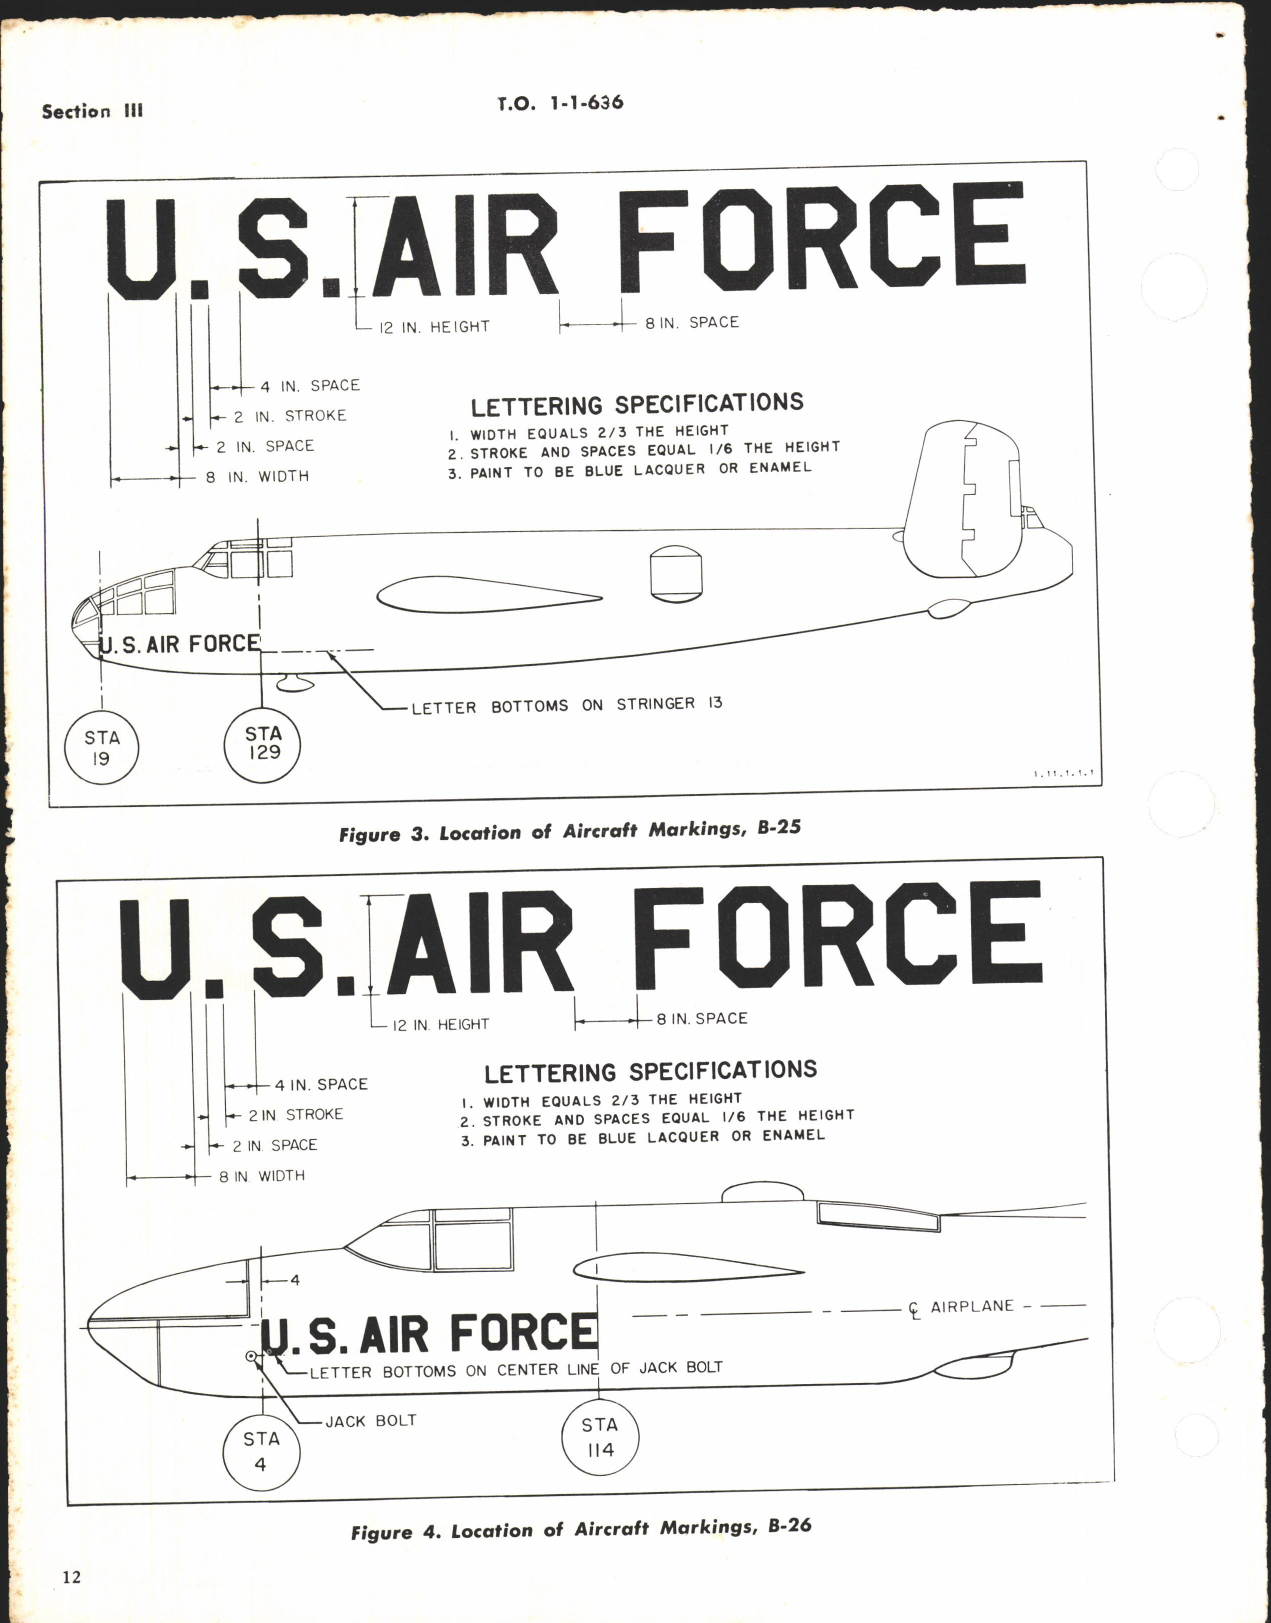 Sample page 16 from AirCorps Library document: Exterior Finishes, Insignia, and Markings Applicable to USAF Aircraft